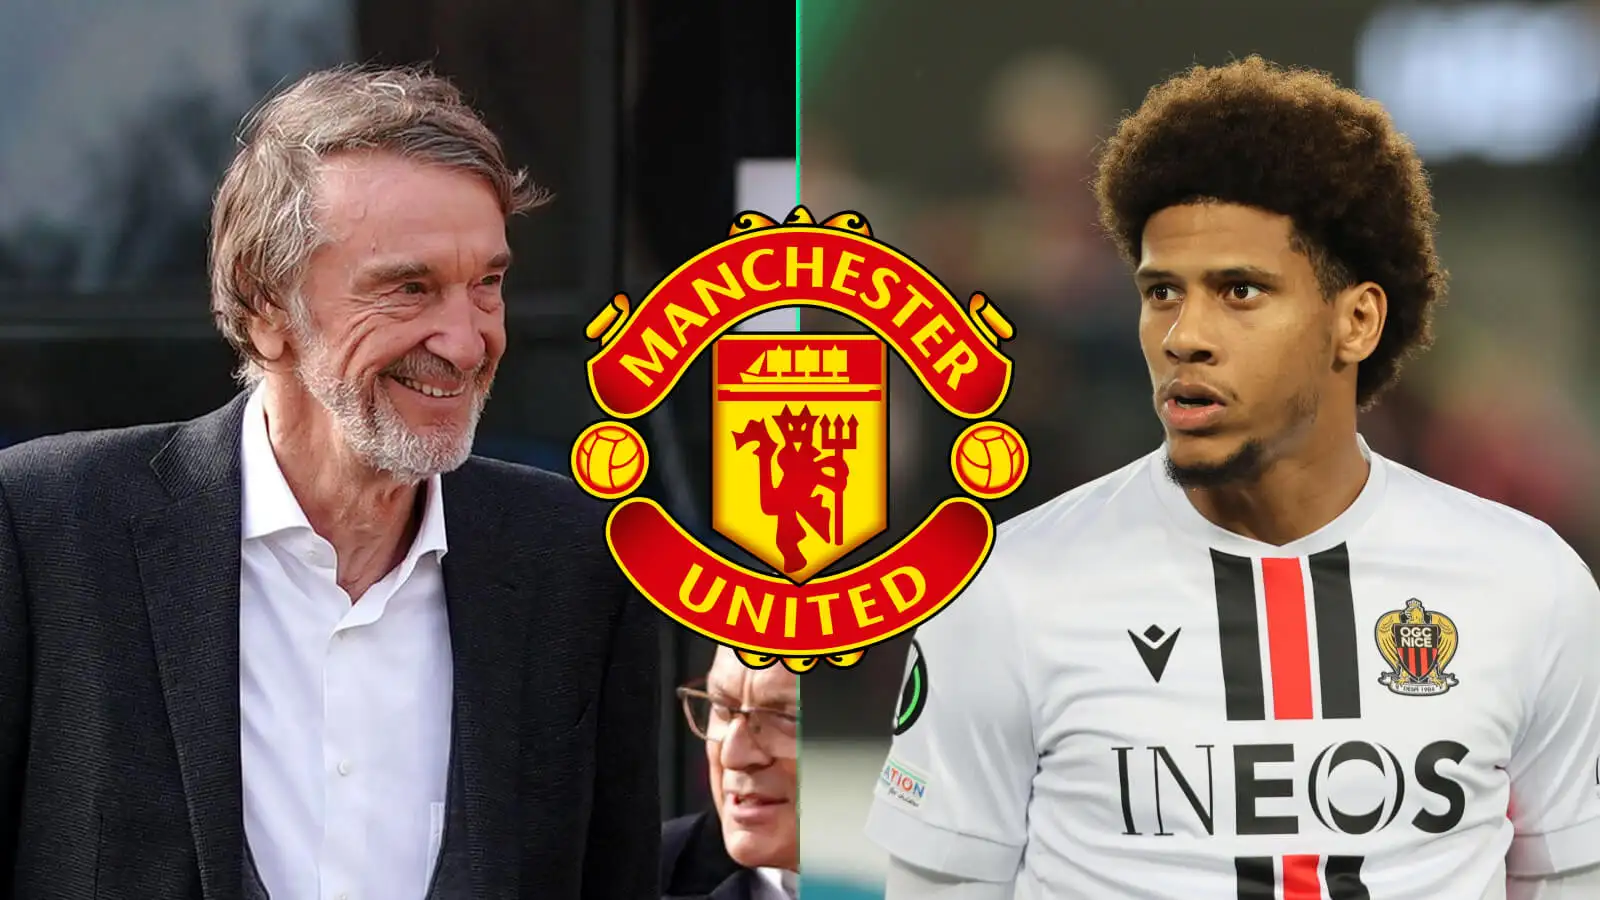 Sir Jim Ratcliffe hopes to expose Nice connections to sign France defender Jean-Clair Todibo for Man Utd